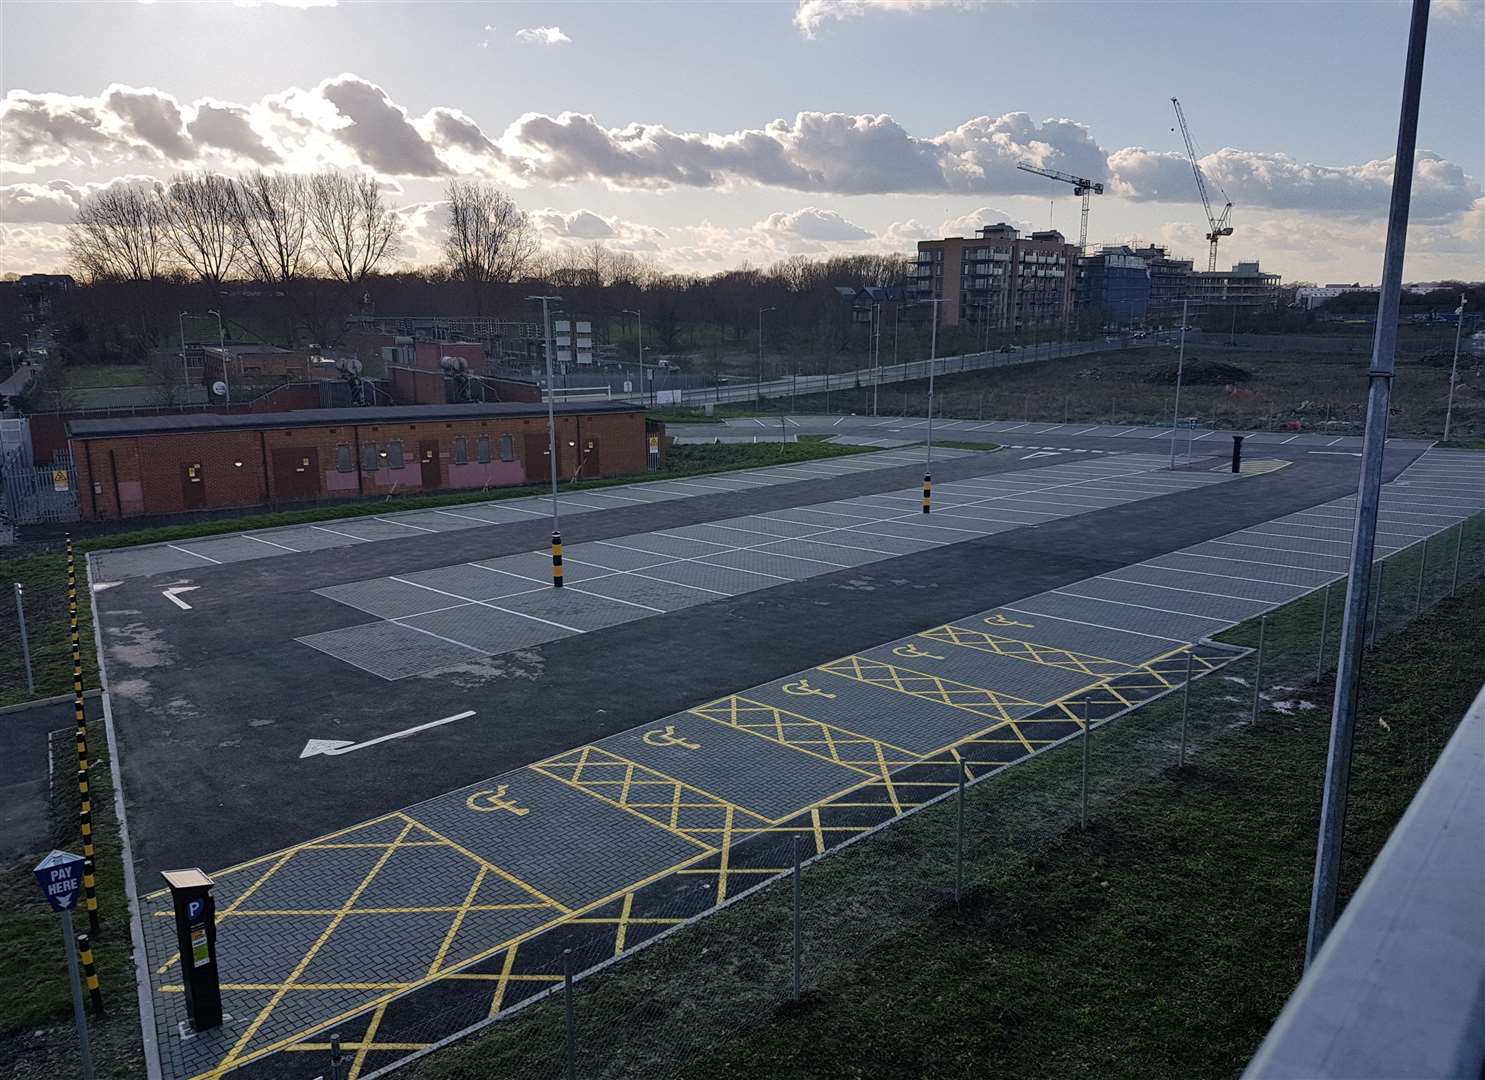 The Victoria Road Car Park in Ashford will be the site of a coronavirus test centre